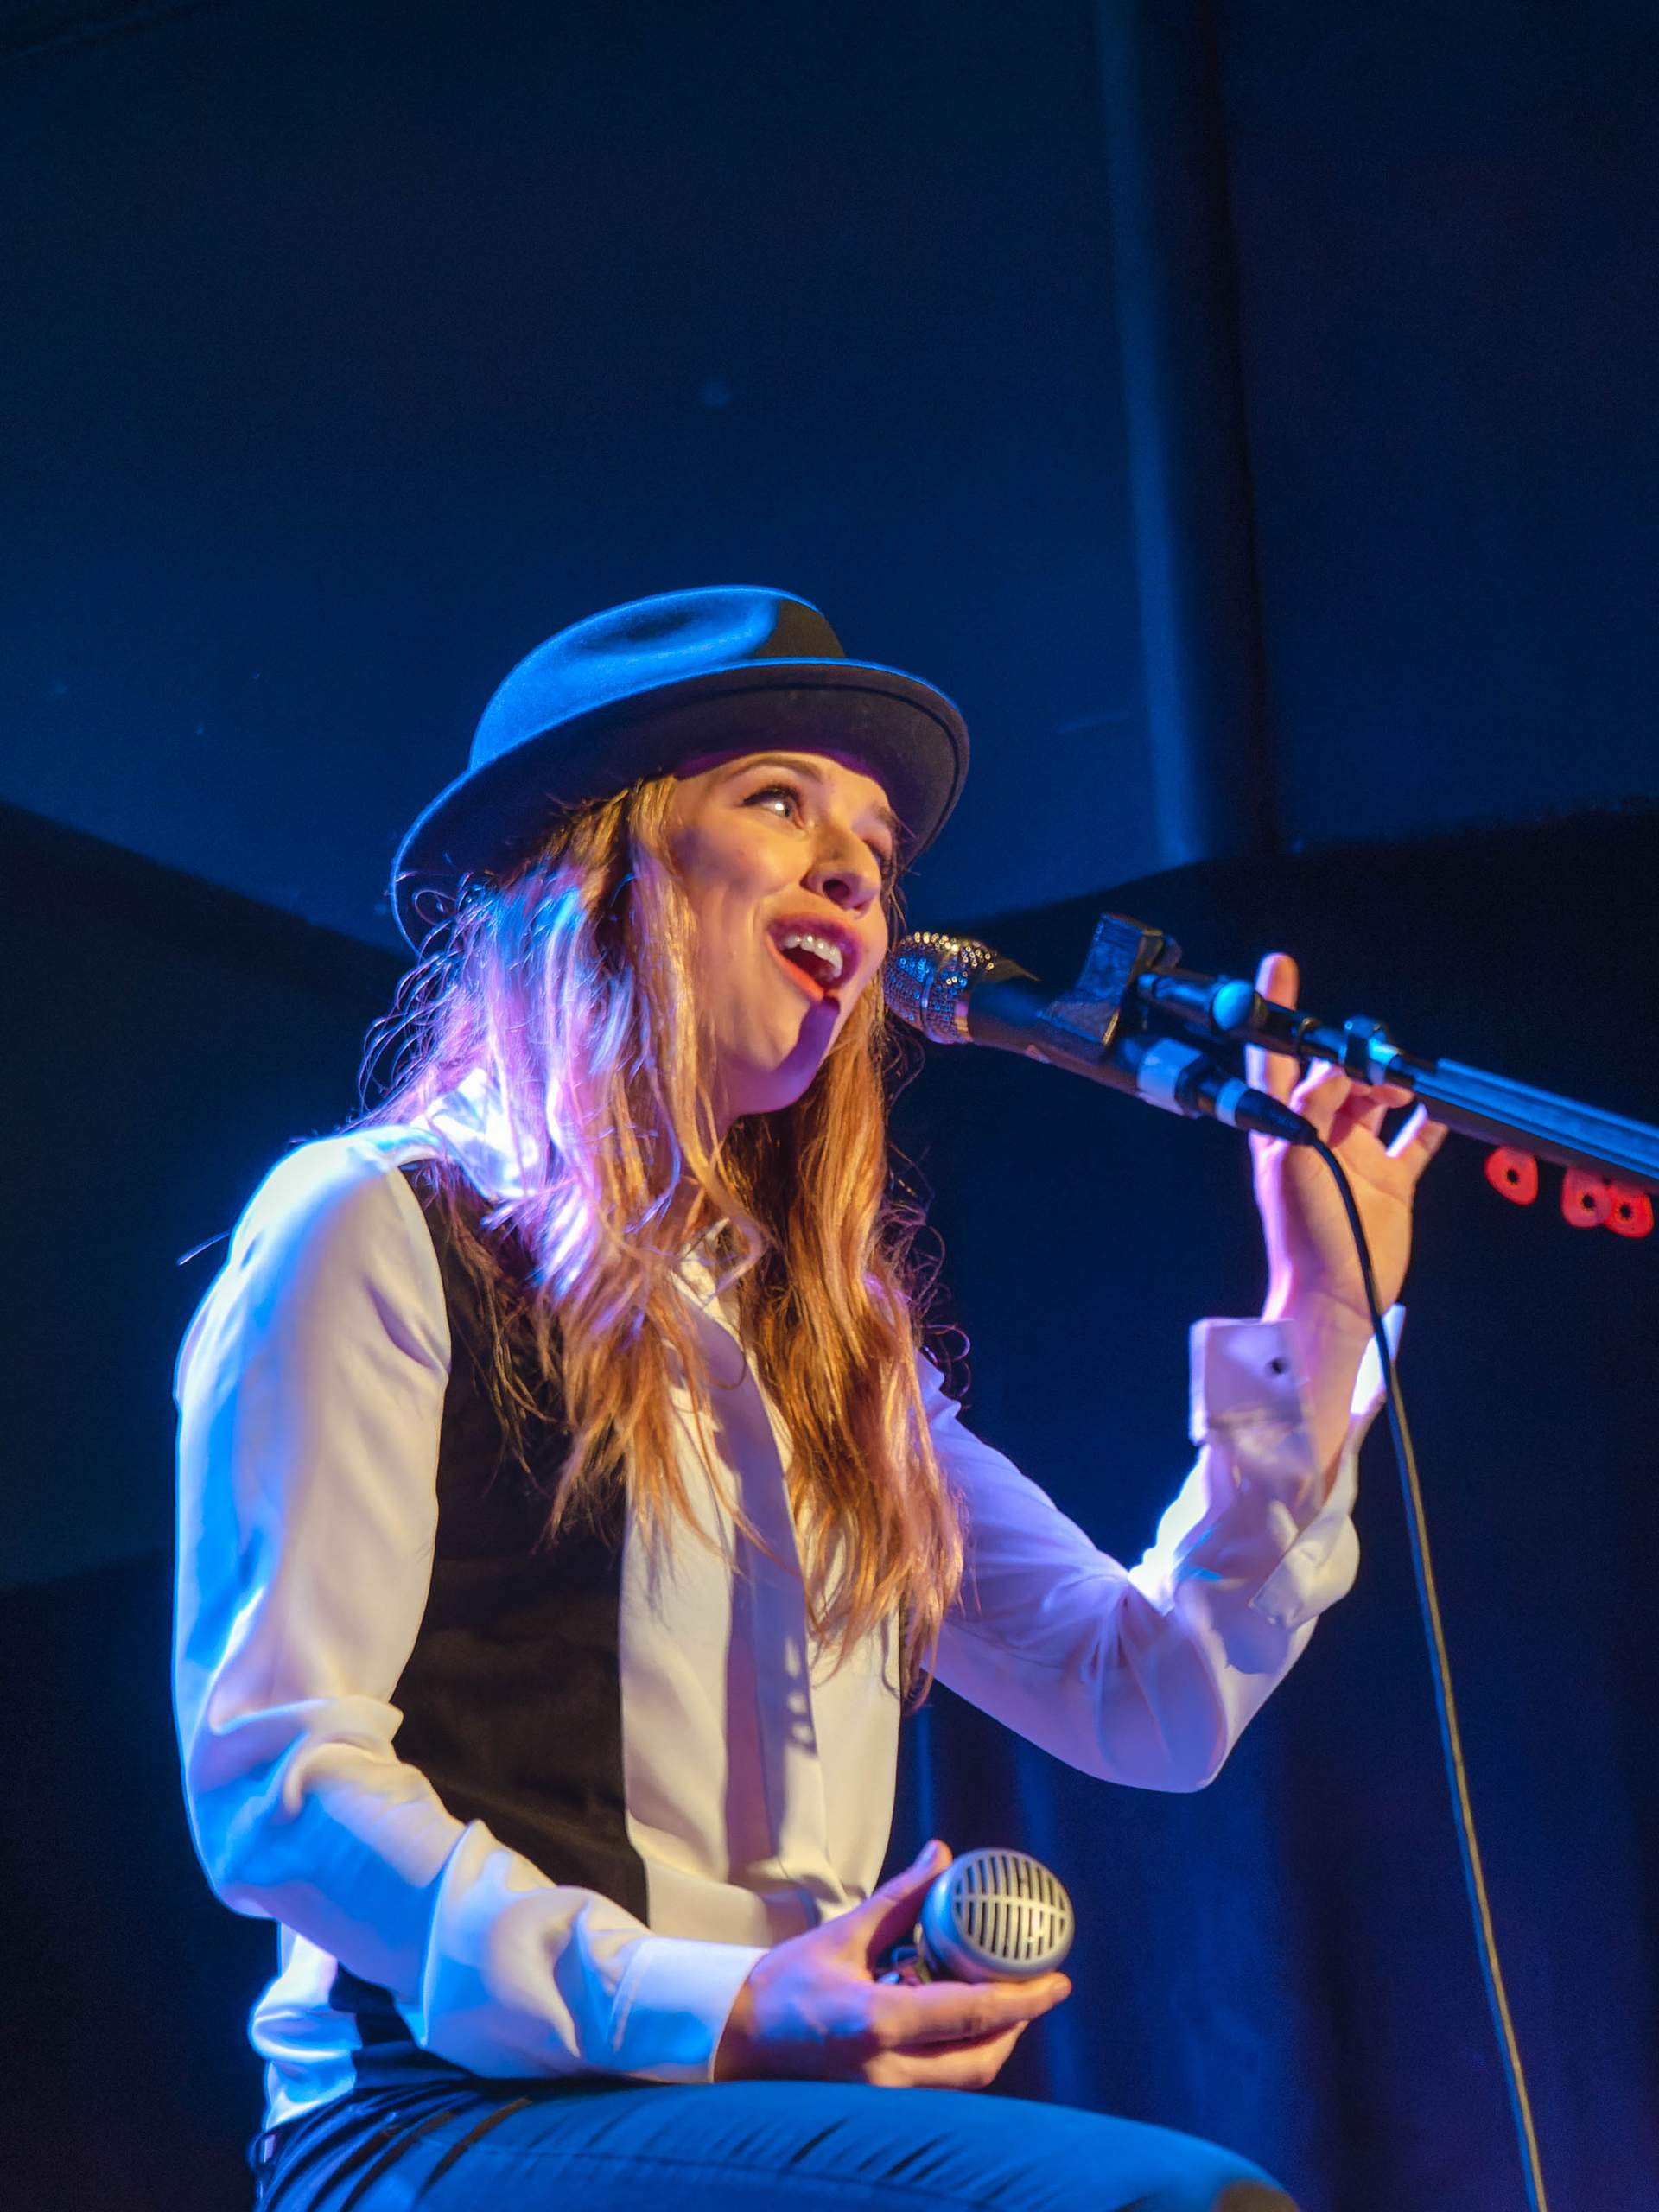 ZZ Ward performing at The Majestic in Madison, WI June 26, 2013, photography by Ross Harried for Second Crop Music